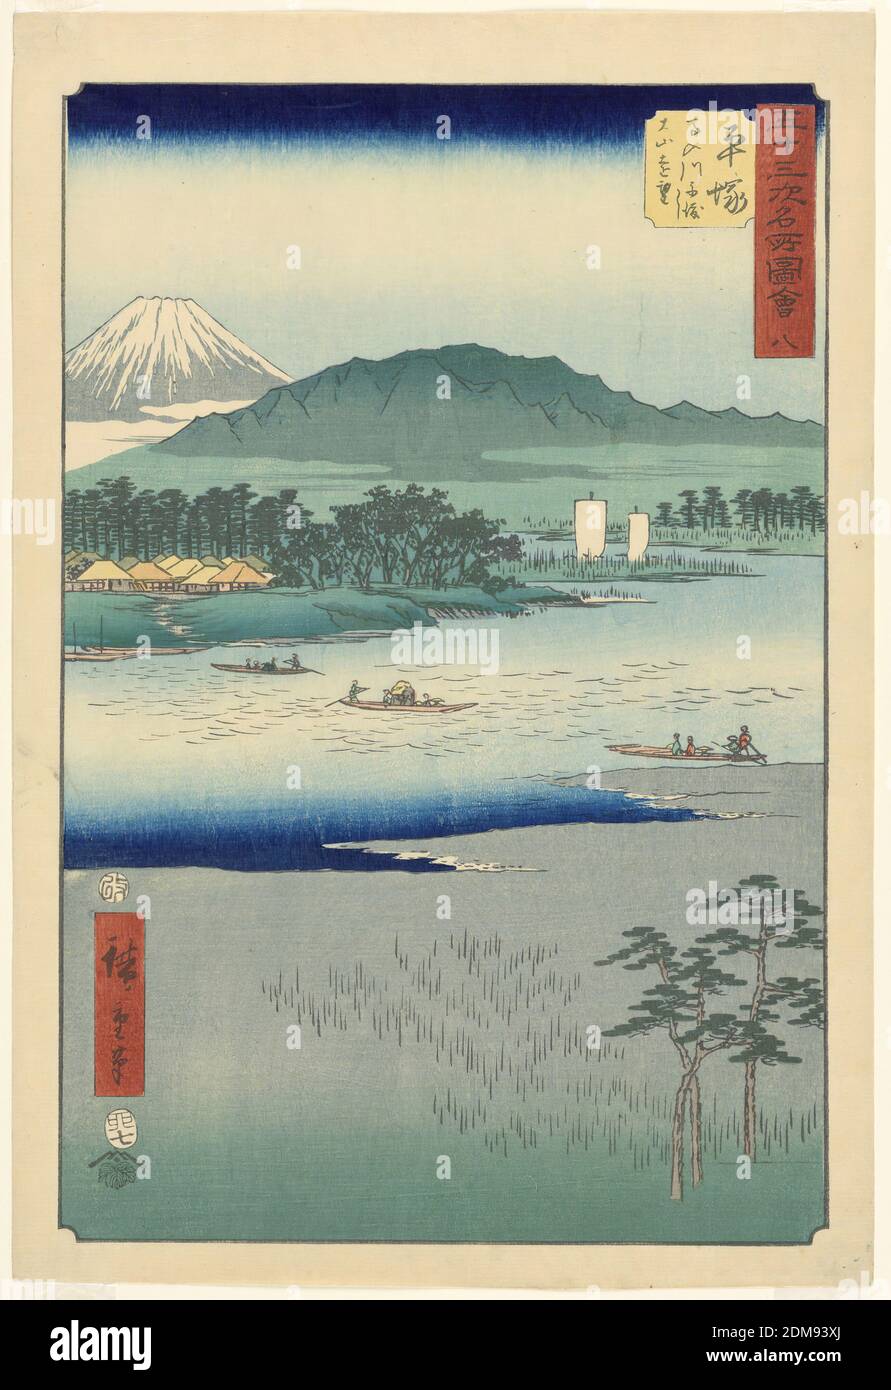 River Highway, Ando Hiroshige, Japanese, 1797–1858, Woodblock print in colored ink on paper, Water was the main highway of transportation during this time. Three boats filled with people are traveling back and forth from shore to shore. Two bigger ships are shown in the background sailing downstream. A village is tucked at the edge of a forest with Mt. Fuji looming beyond in the distance. The foreground is neutral, with abstract lines suggesting a swamp with tall grasses., Japan, 1797-1858, landscapes, Print Stock Photo